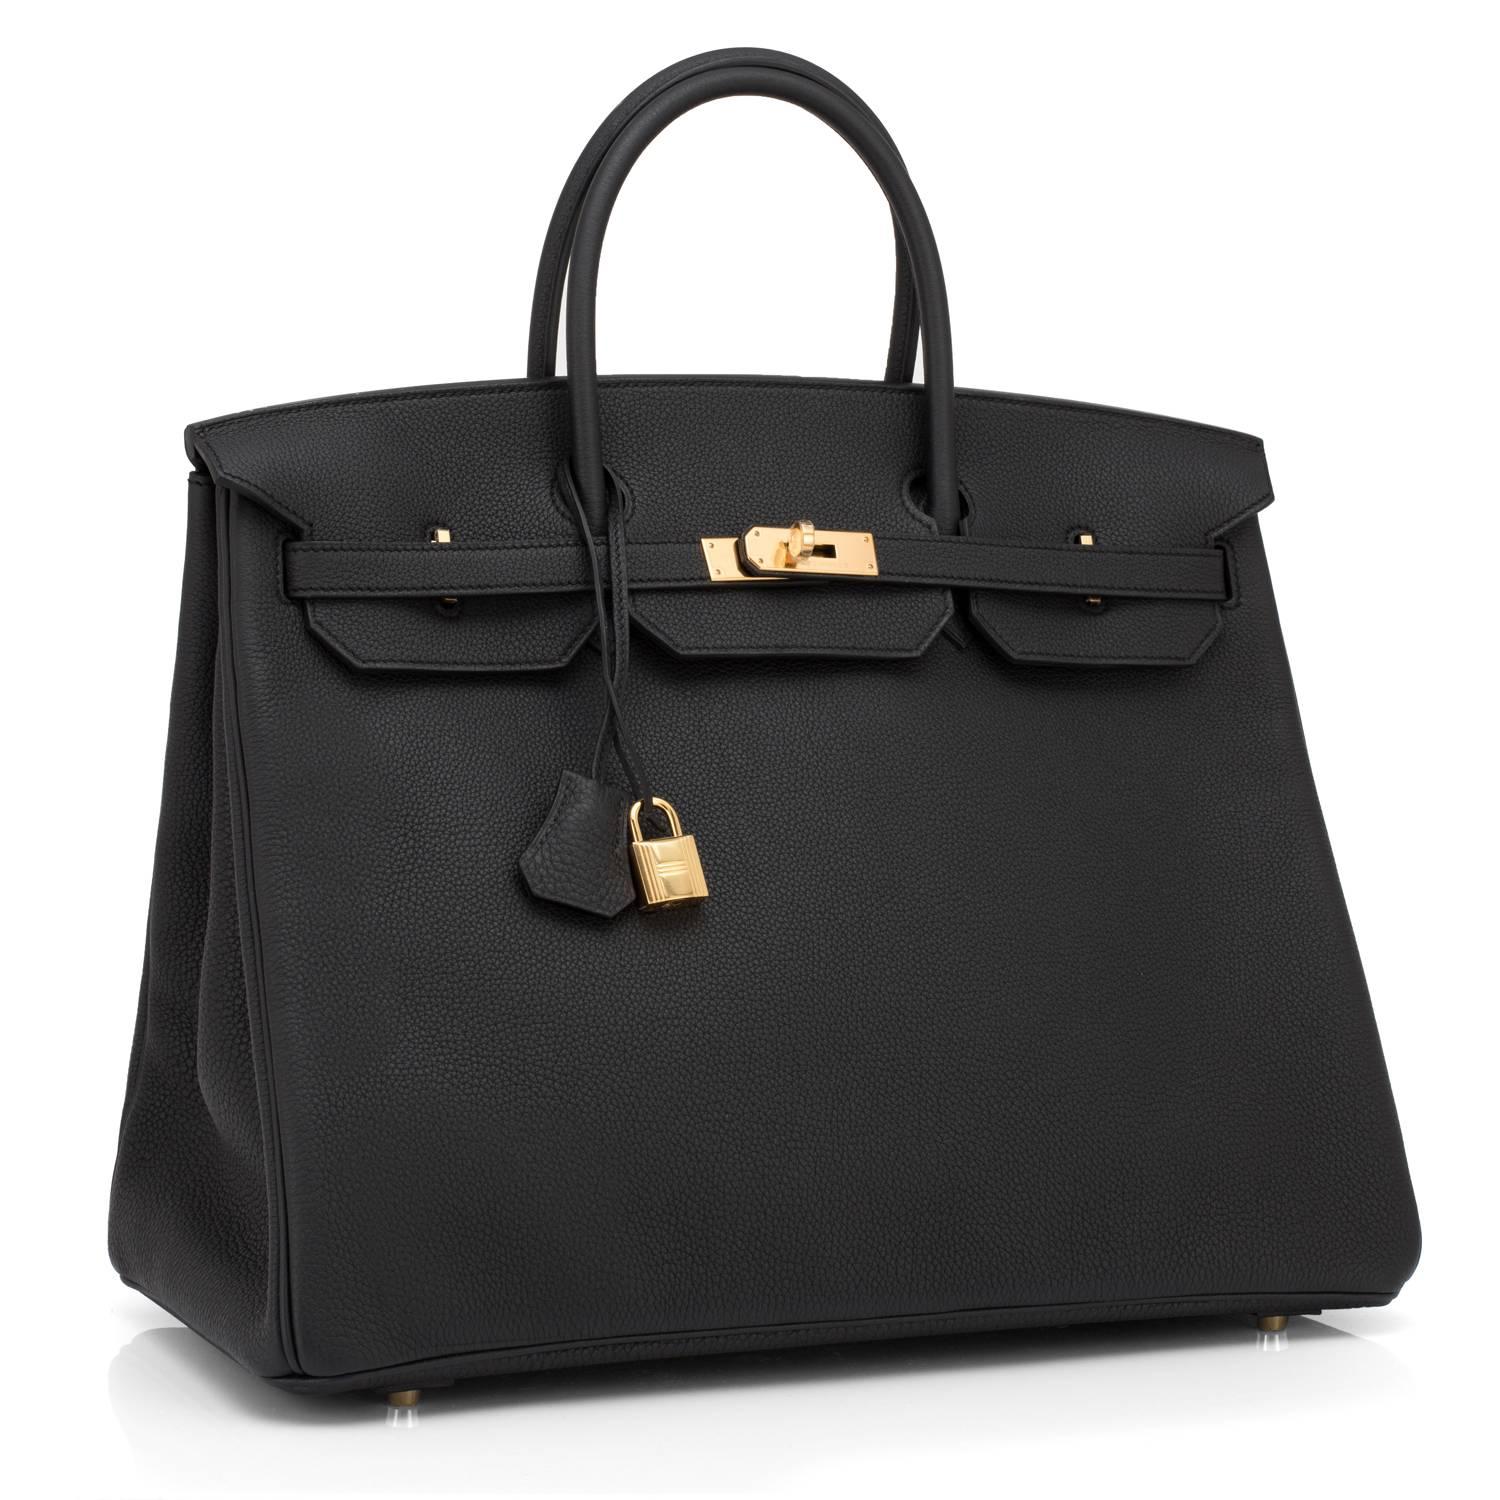 Hermes Black Togo 40cm Birkin Gold Hardware GHW Power Birkin
Brand New in Box. Store fresh. Pristine Condition (with plastic on hardware).
Just purchased from Hermes store; bag bears new interior X stamp.
Perfect gift! Comes with lock, keys,